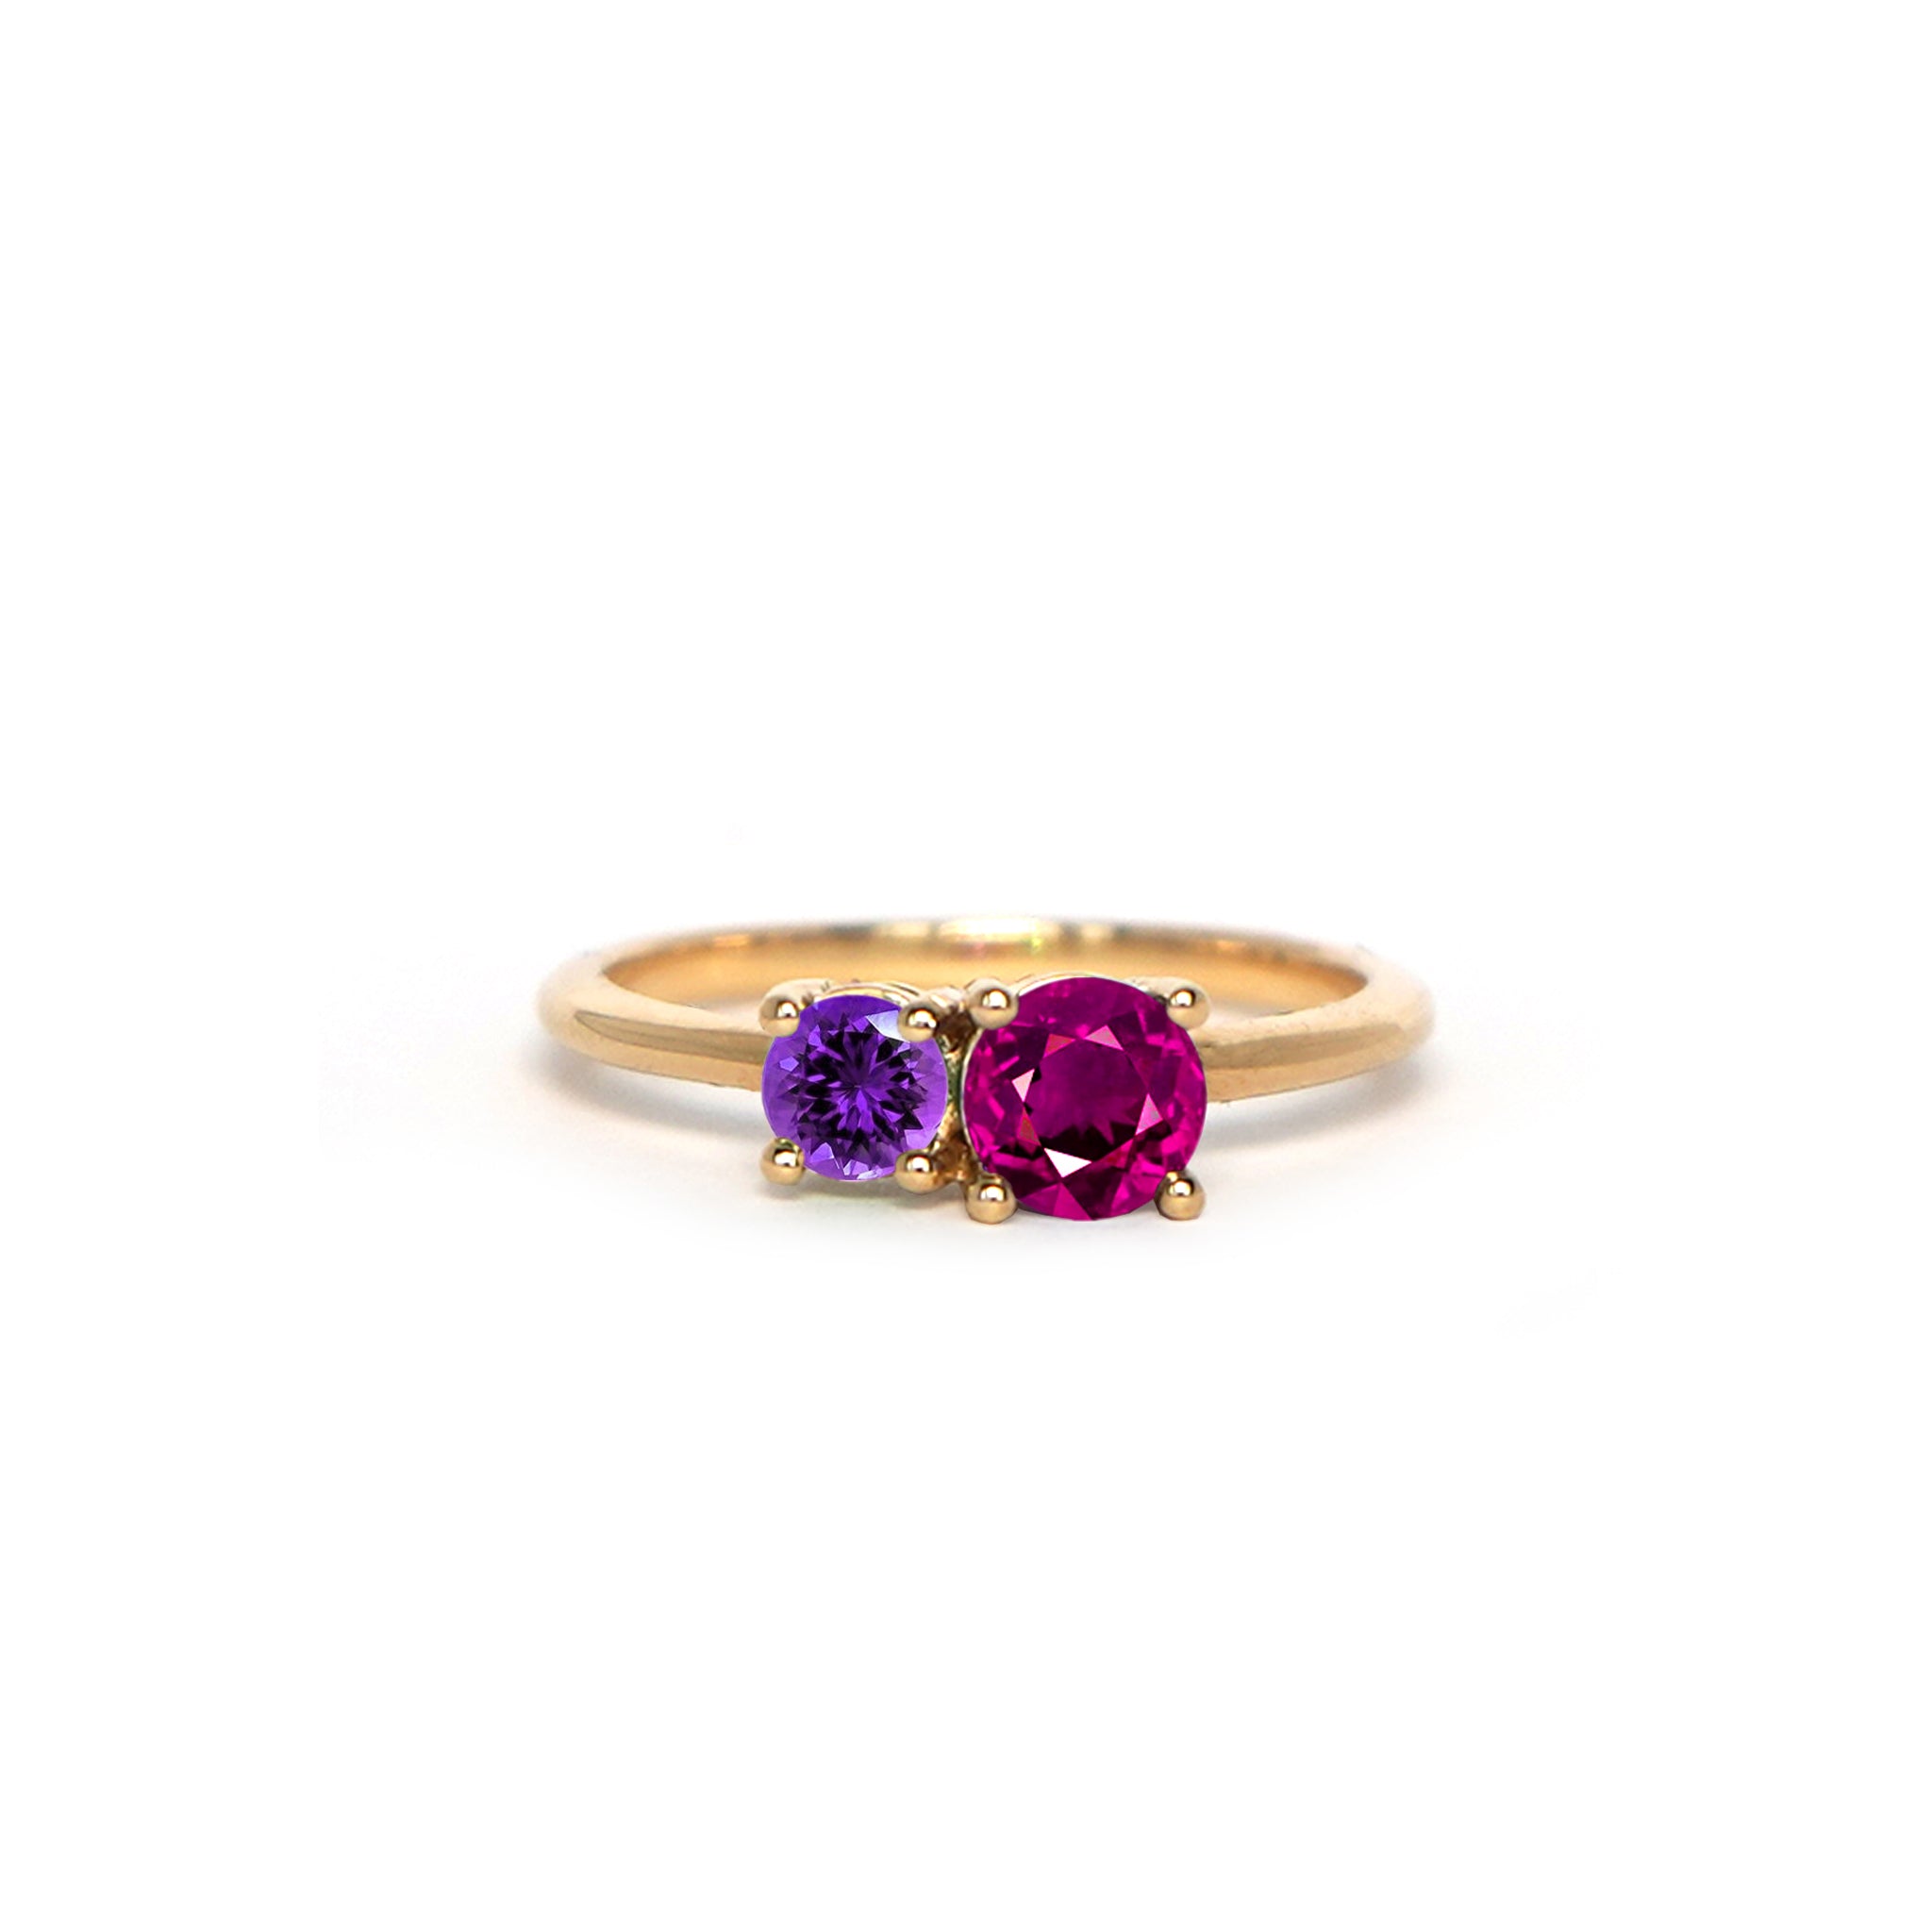 Night Lights ring by Lico Jewelry, featuring genuine rhodolite garnet and pink tanzanite on solid 14k yellow gold